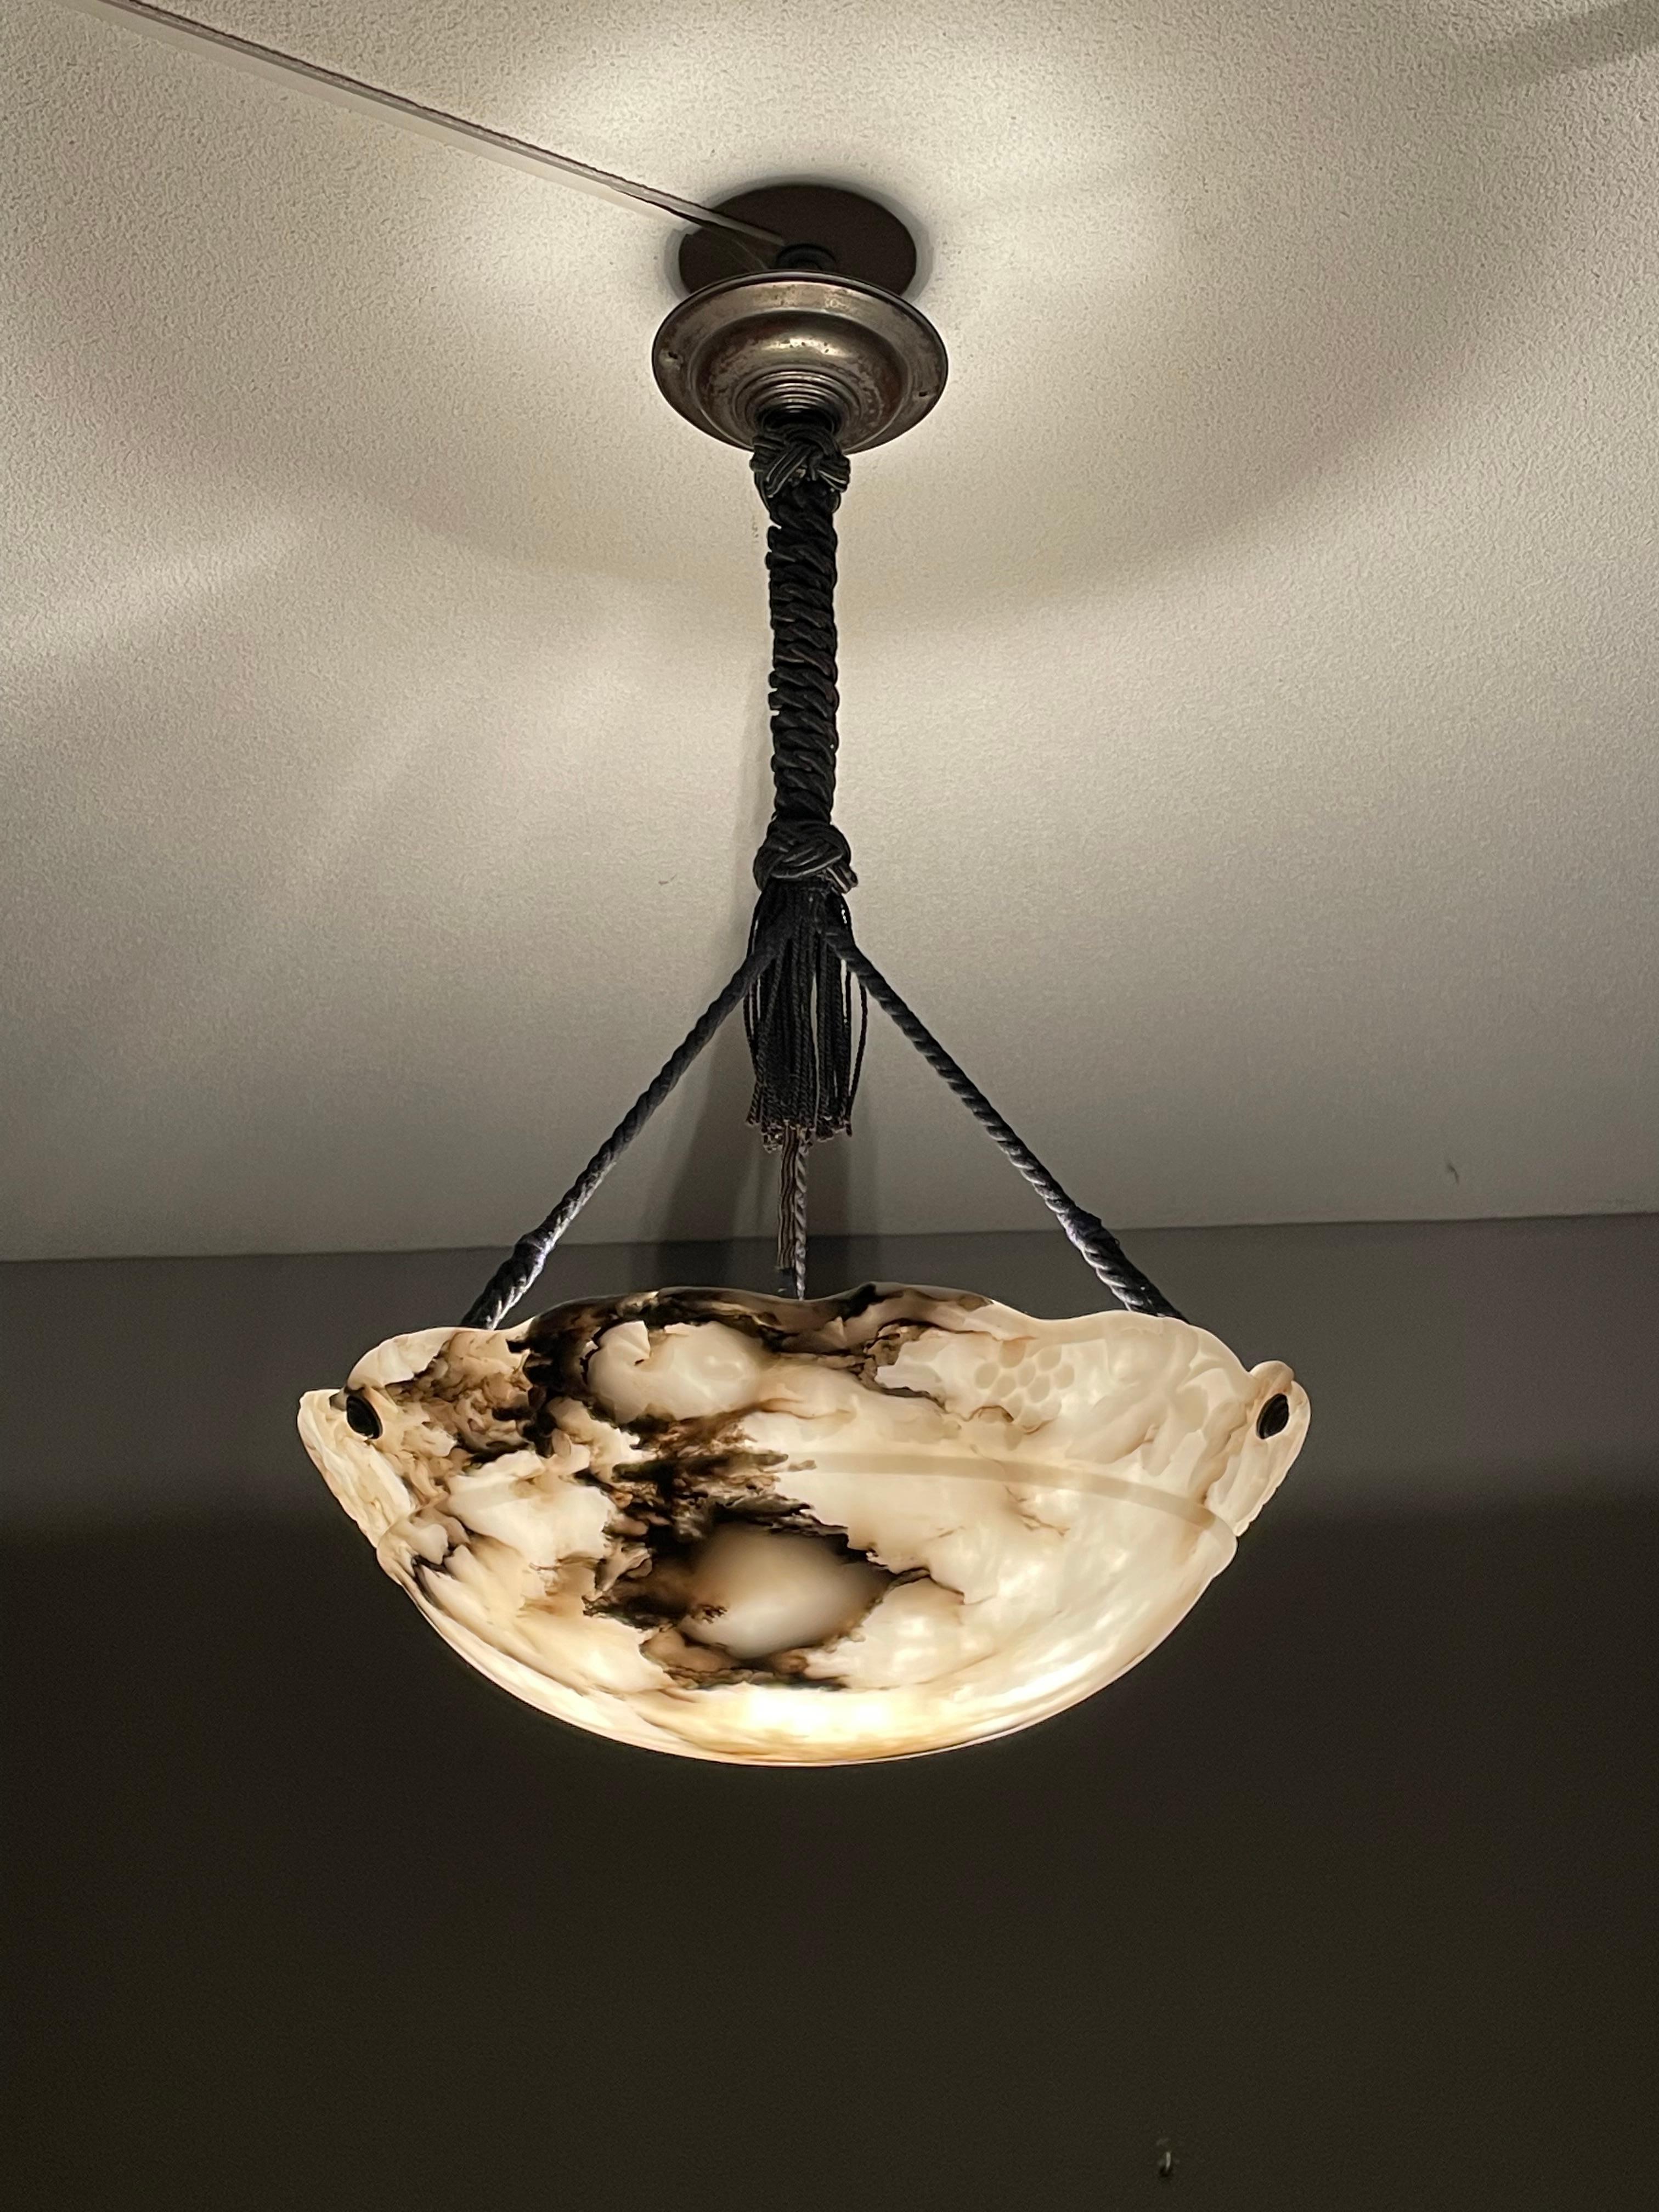 Beautifully hand carved and mint condition antique alabaster shade pendant for wine lovers.

This unique pendant from the earliest years of the 1900s comes with a wonderful grapevine design around the upper rim. The pattern with many leafs and grape